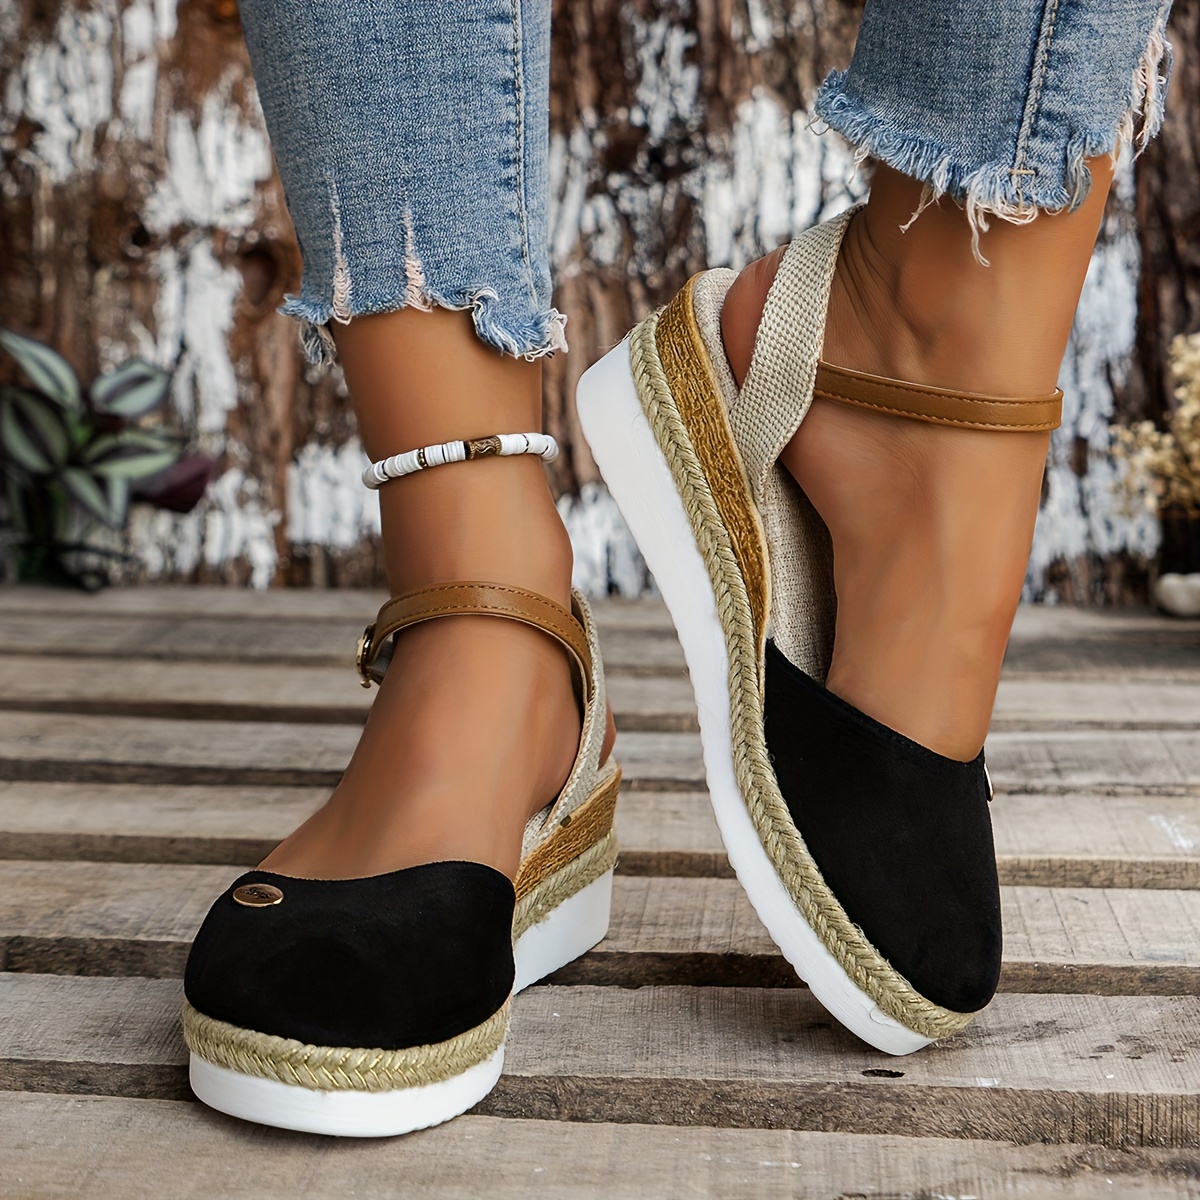 Women's Lace Espadrilles Wedge Sandals, Closed Toe Hollow Out Slip On ...